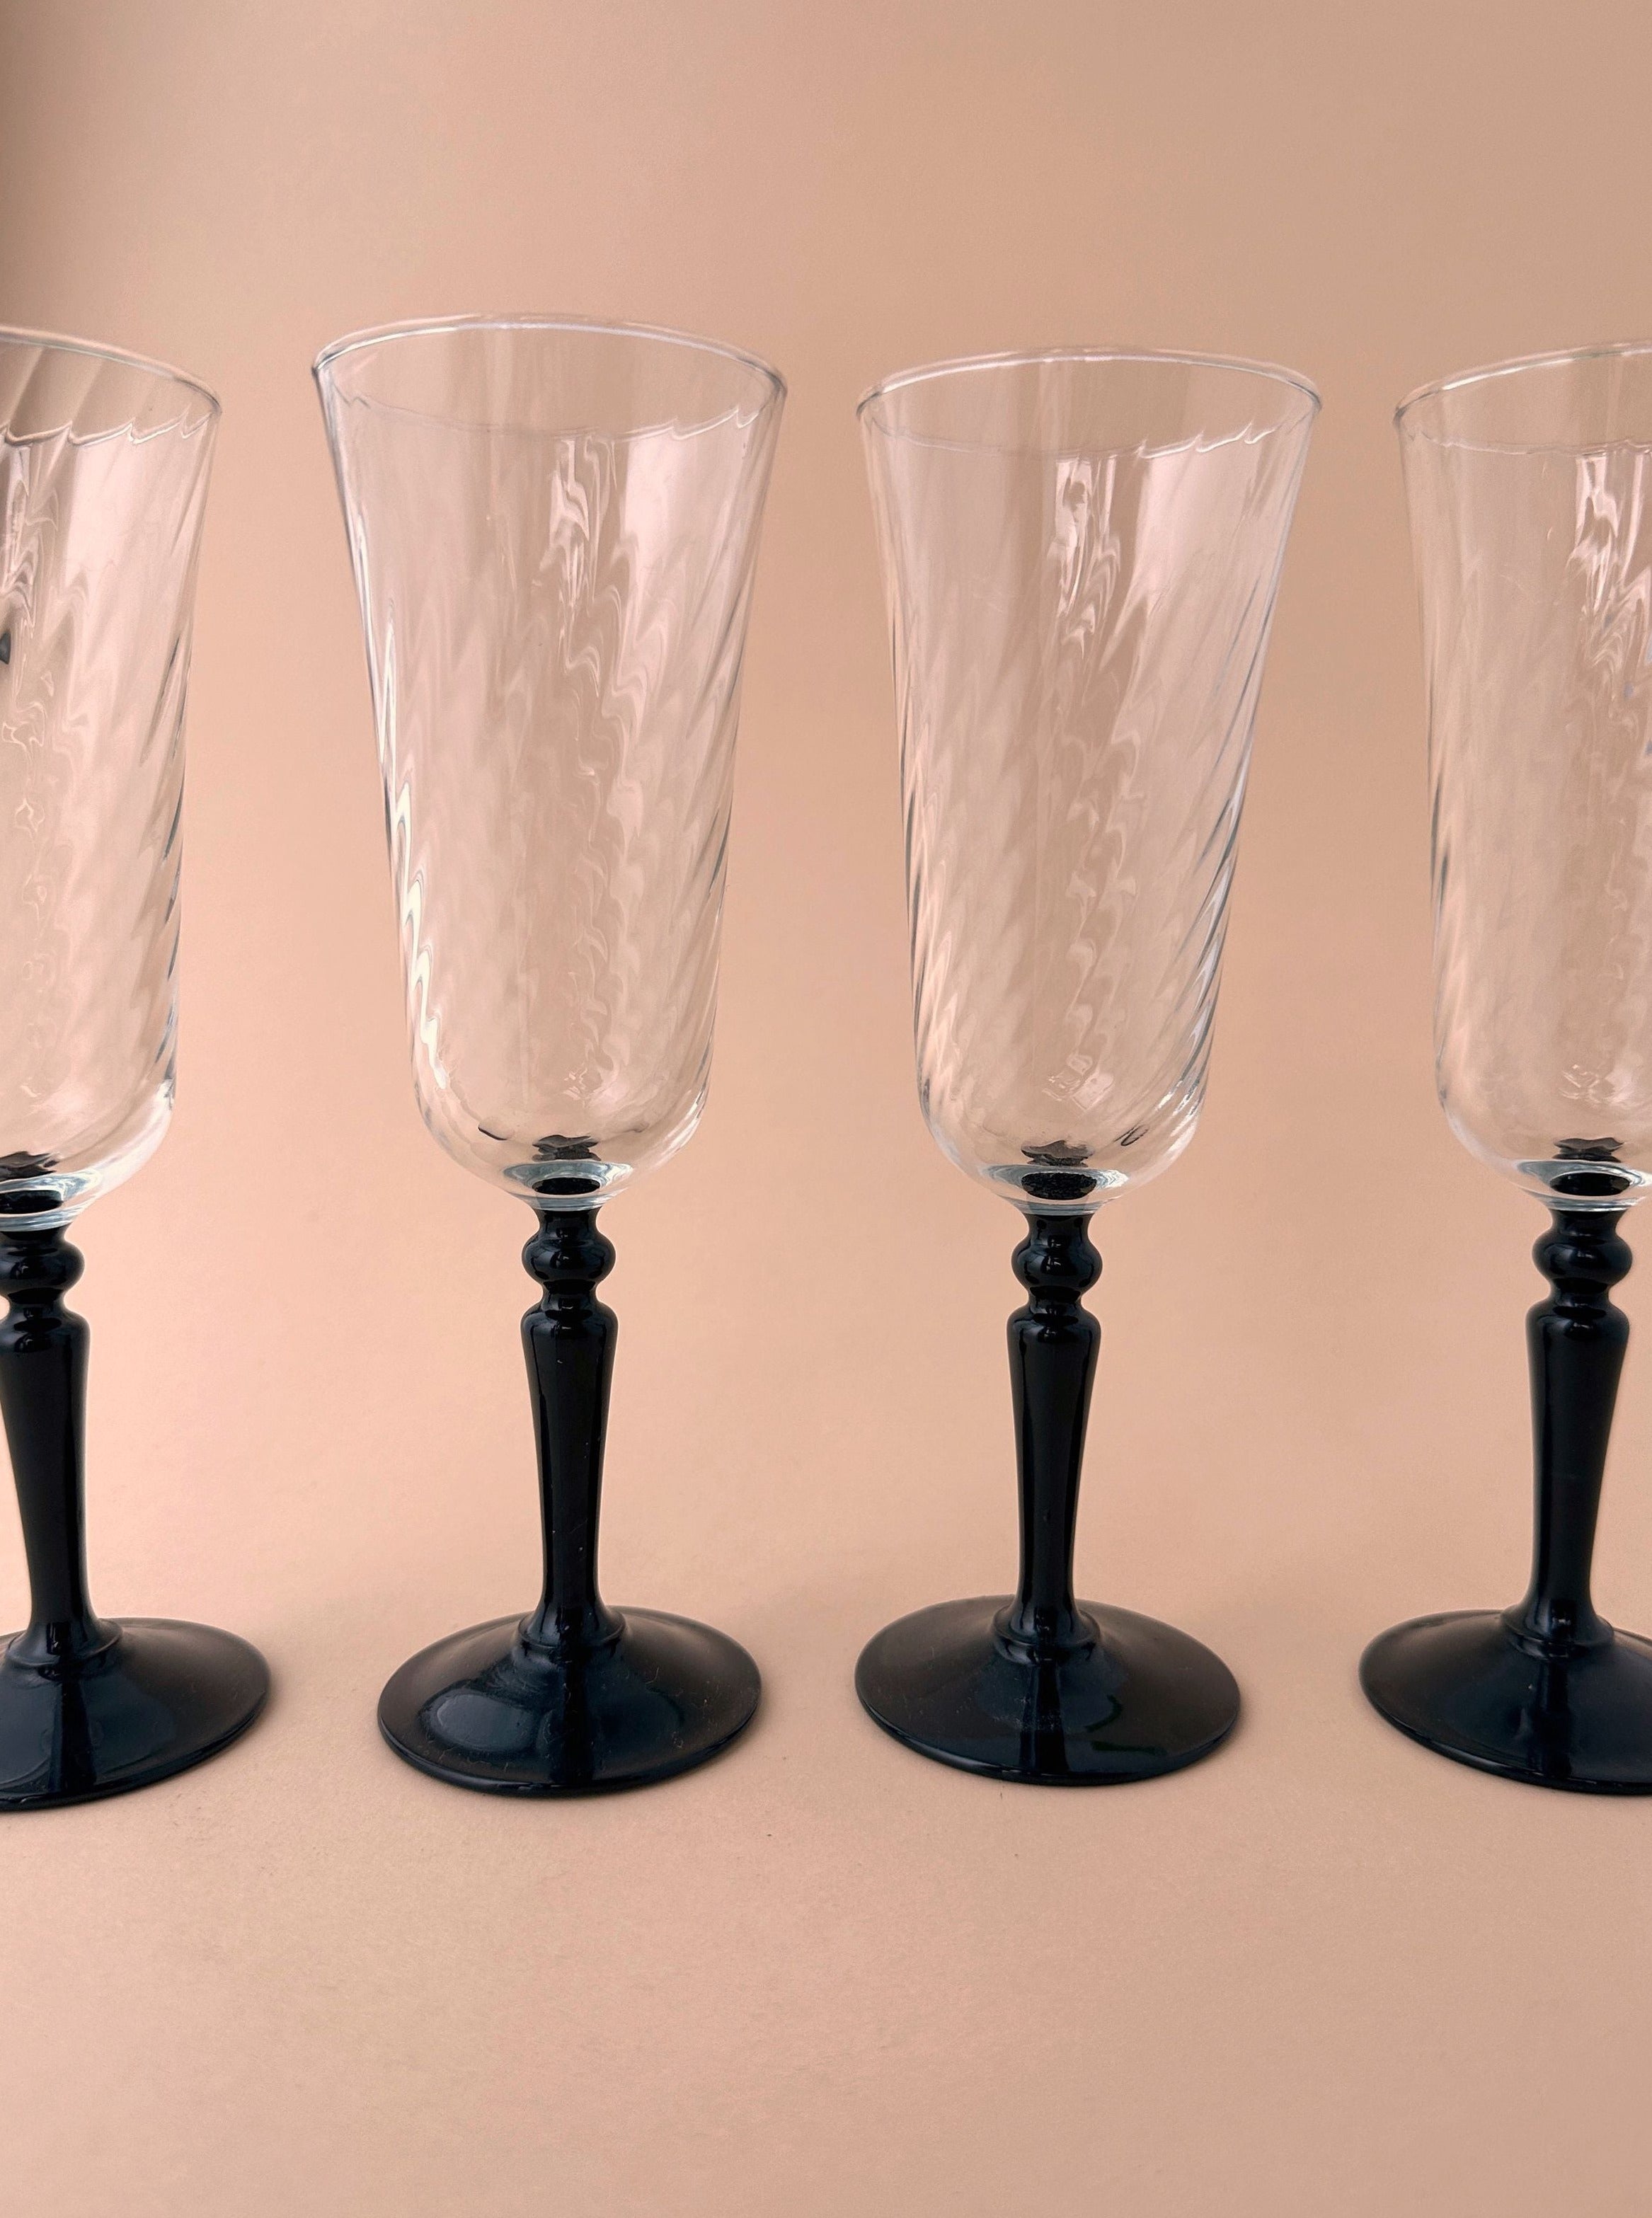 4 French Champagne Glasses With Black Stem